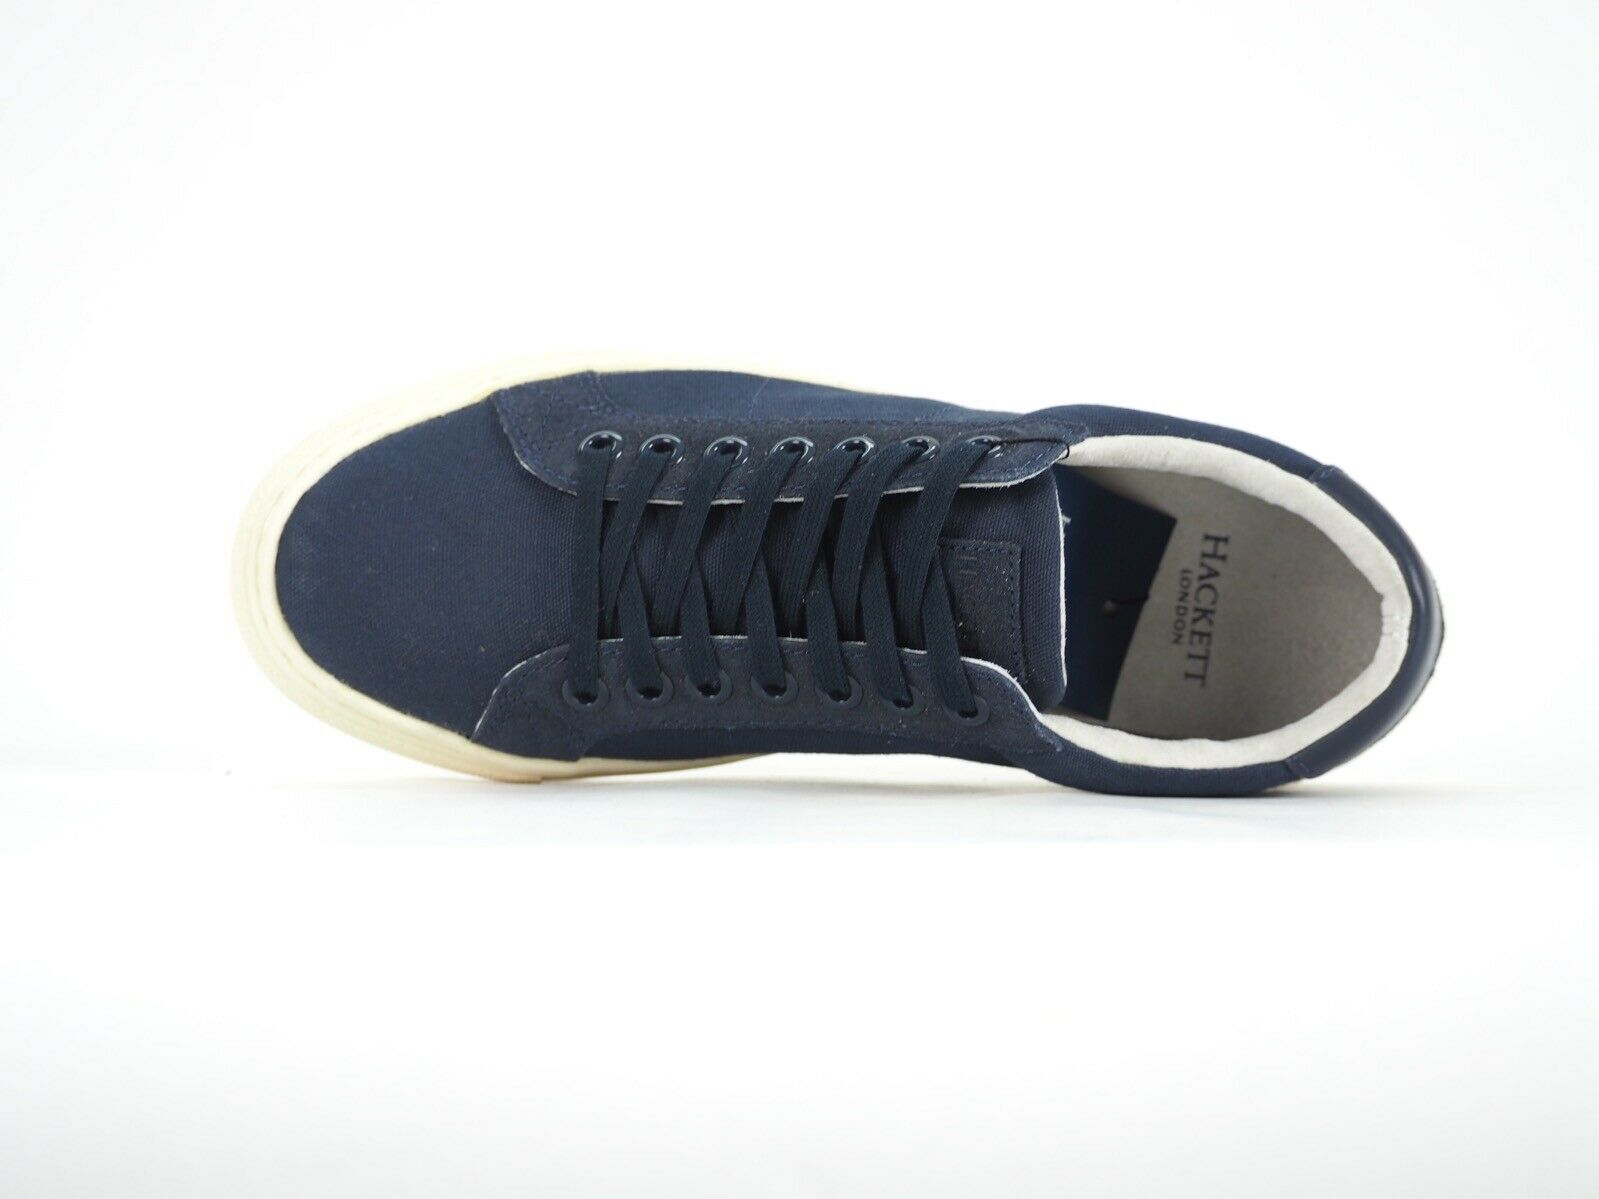 Mens Hackett London Cranfield HMS20572 Navy Blue Lace Up Casual Trainers UK 5 - London Top Style